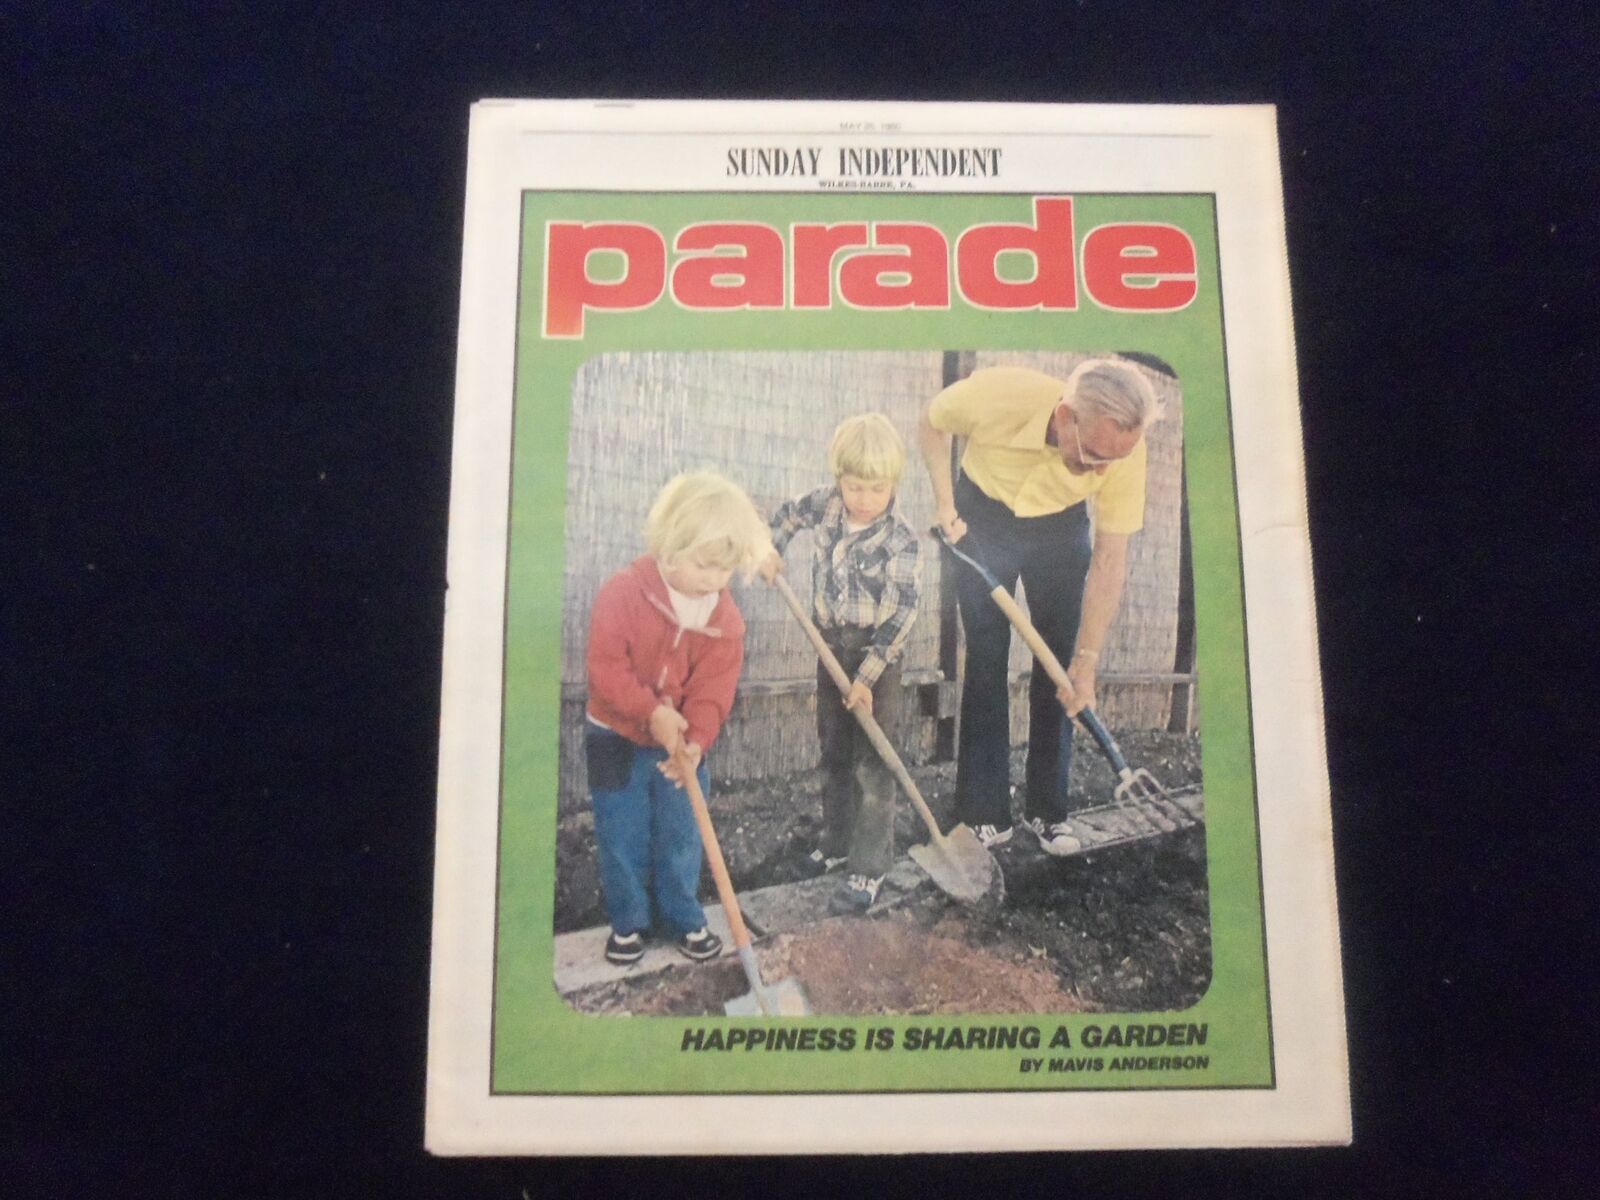 1980 MAY 25 SUNDAY INDEPENDENT PARADE MAGAZINE-WILKES-BARRE,PA- GARDEN - NP 6213